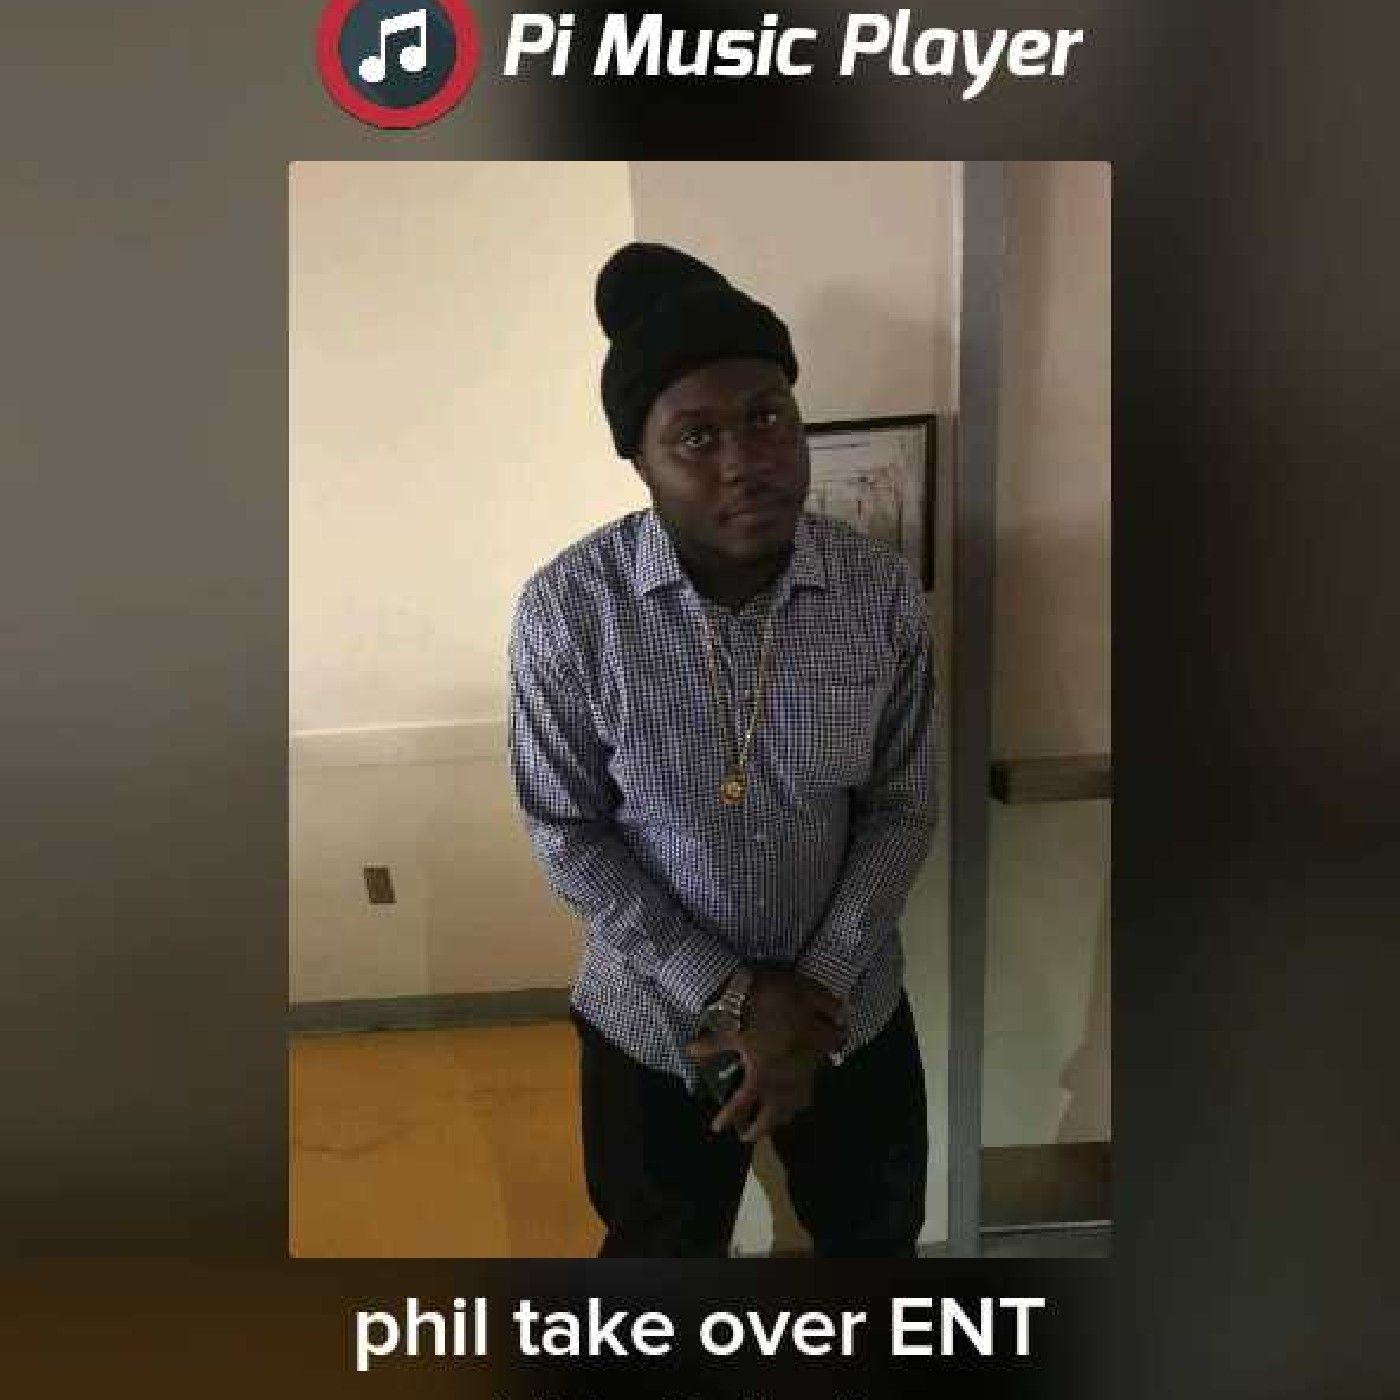 Episode 3 - Phil takeover ENT